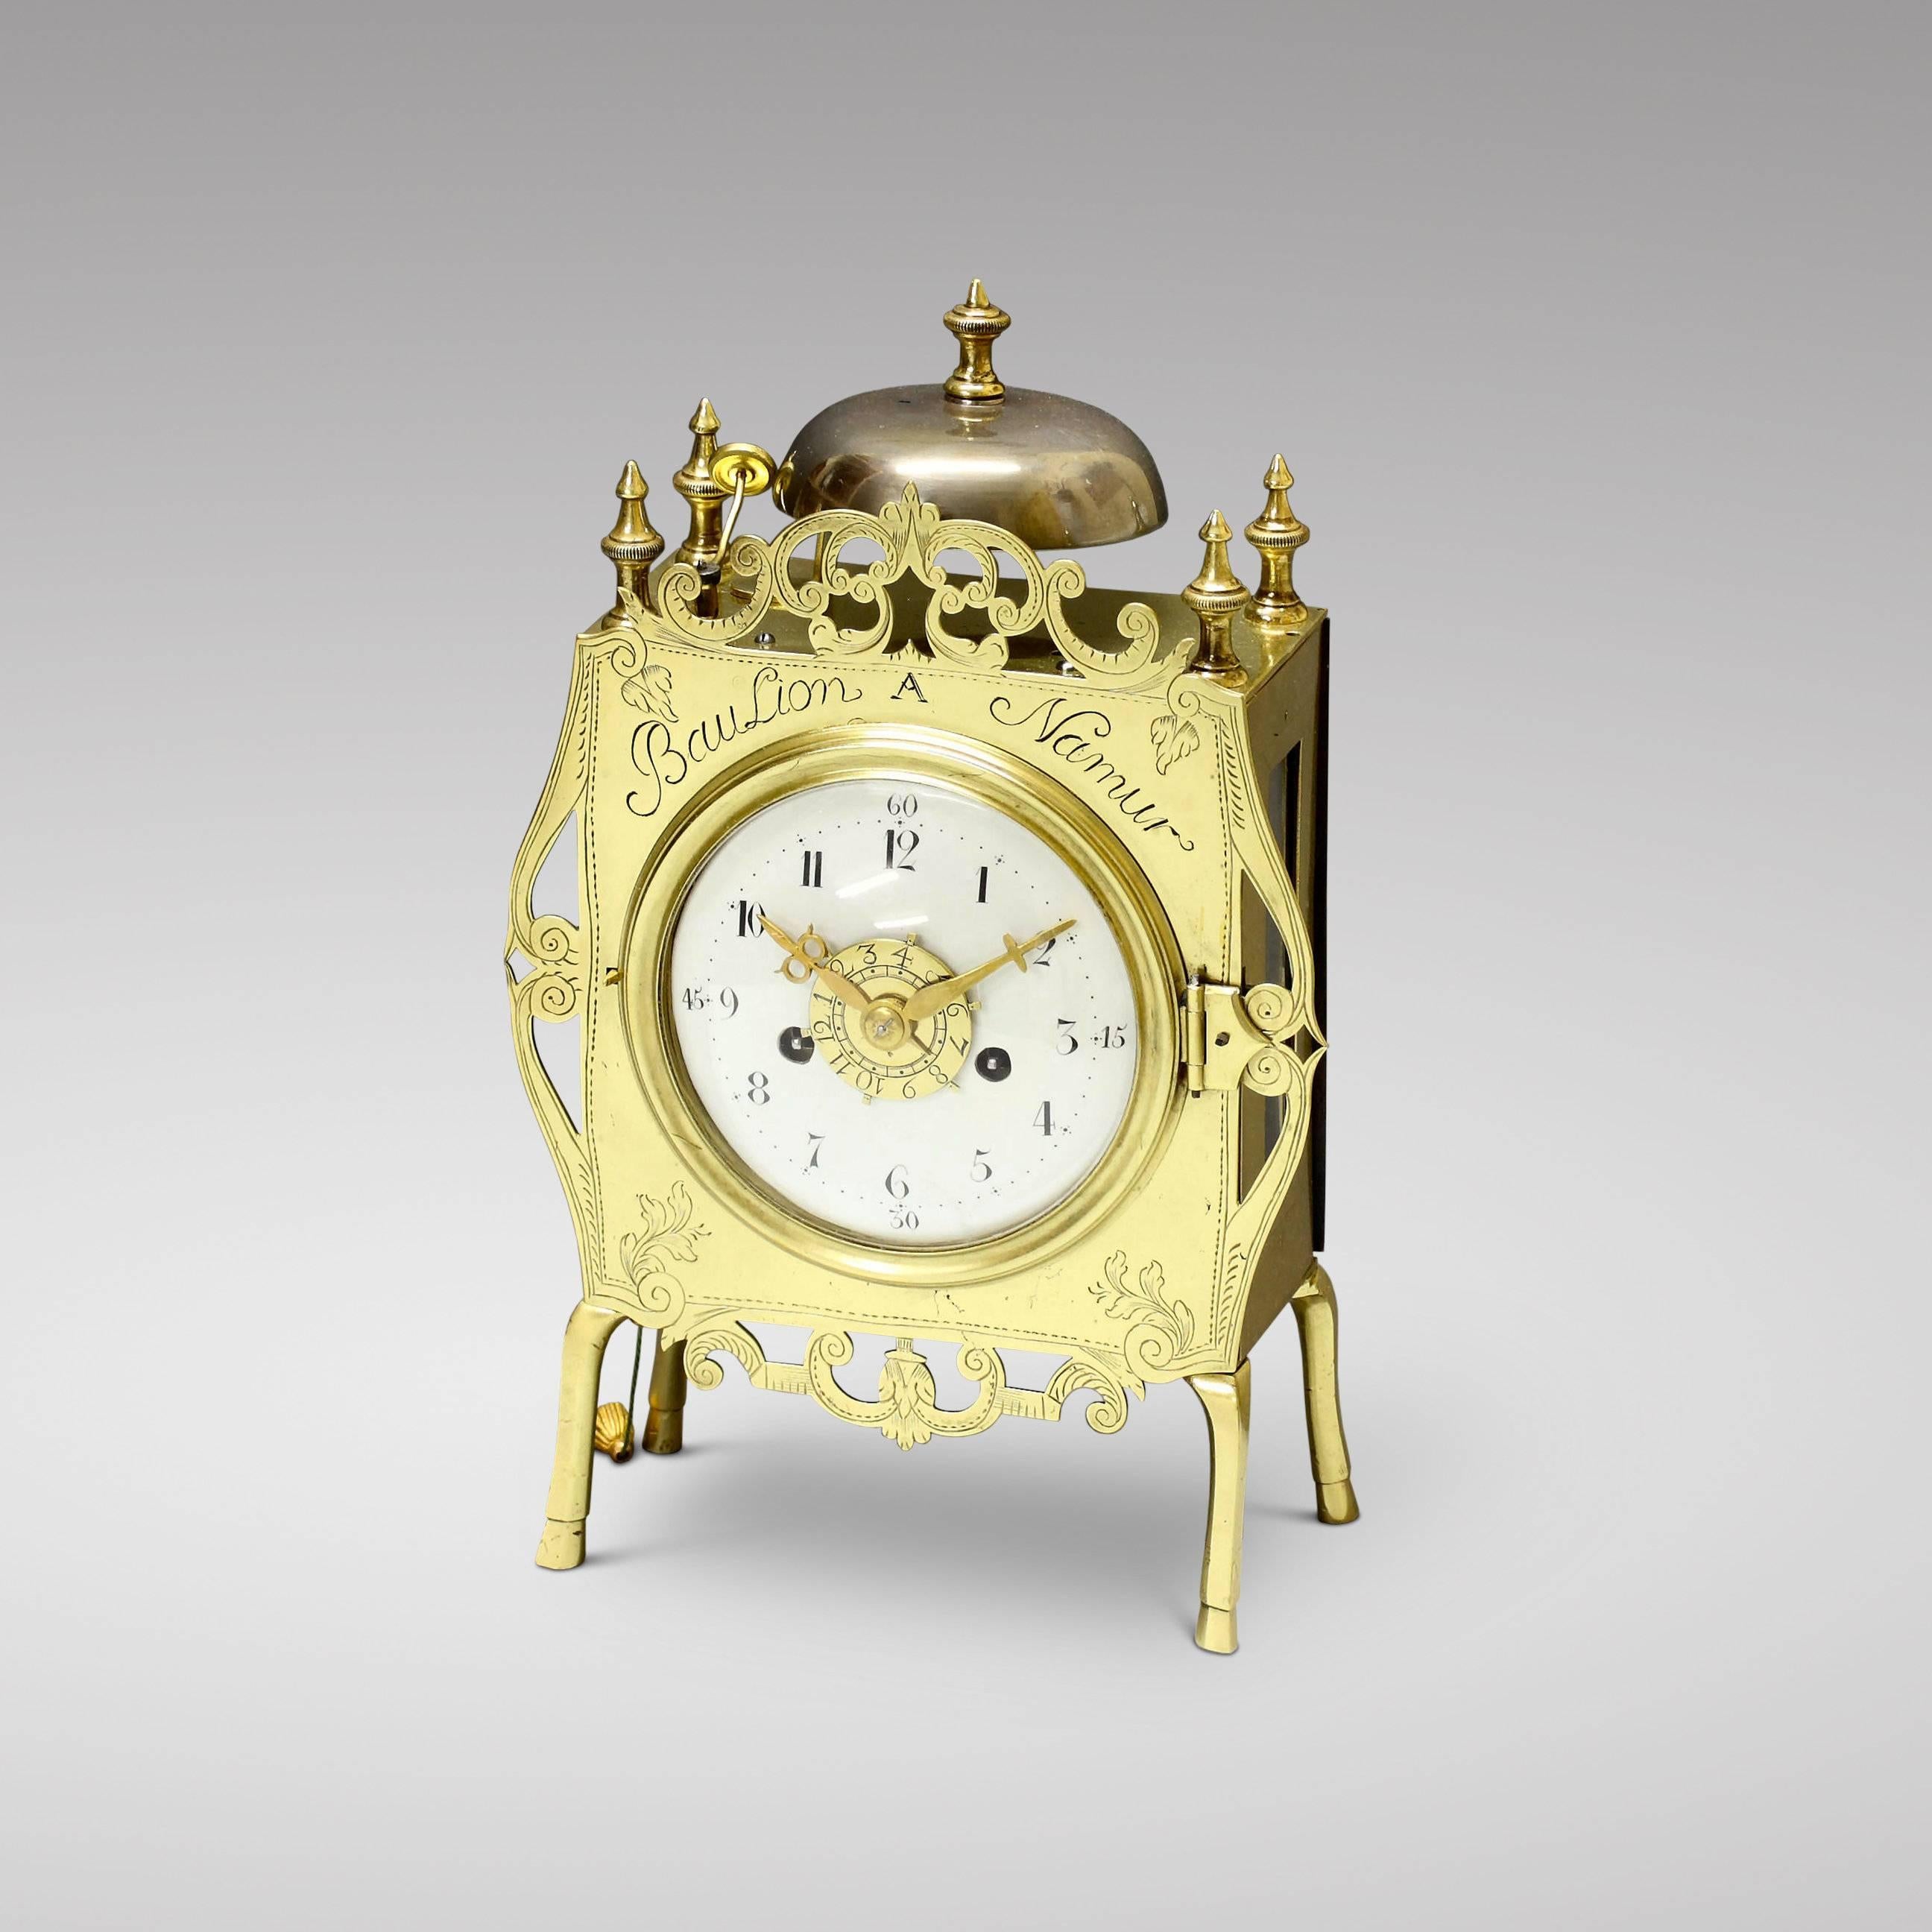 Baulion À Namur, portable table clock, Louis XV period, circa 1760.
Movement with square plates and two winders. Verge escapement, very short pendulum. Half-hourly rack strike on a silvered bell placed on top of the case. A pull-winder on the left